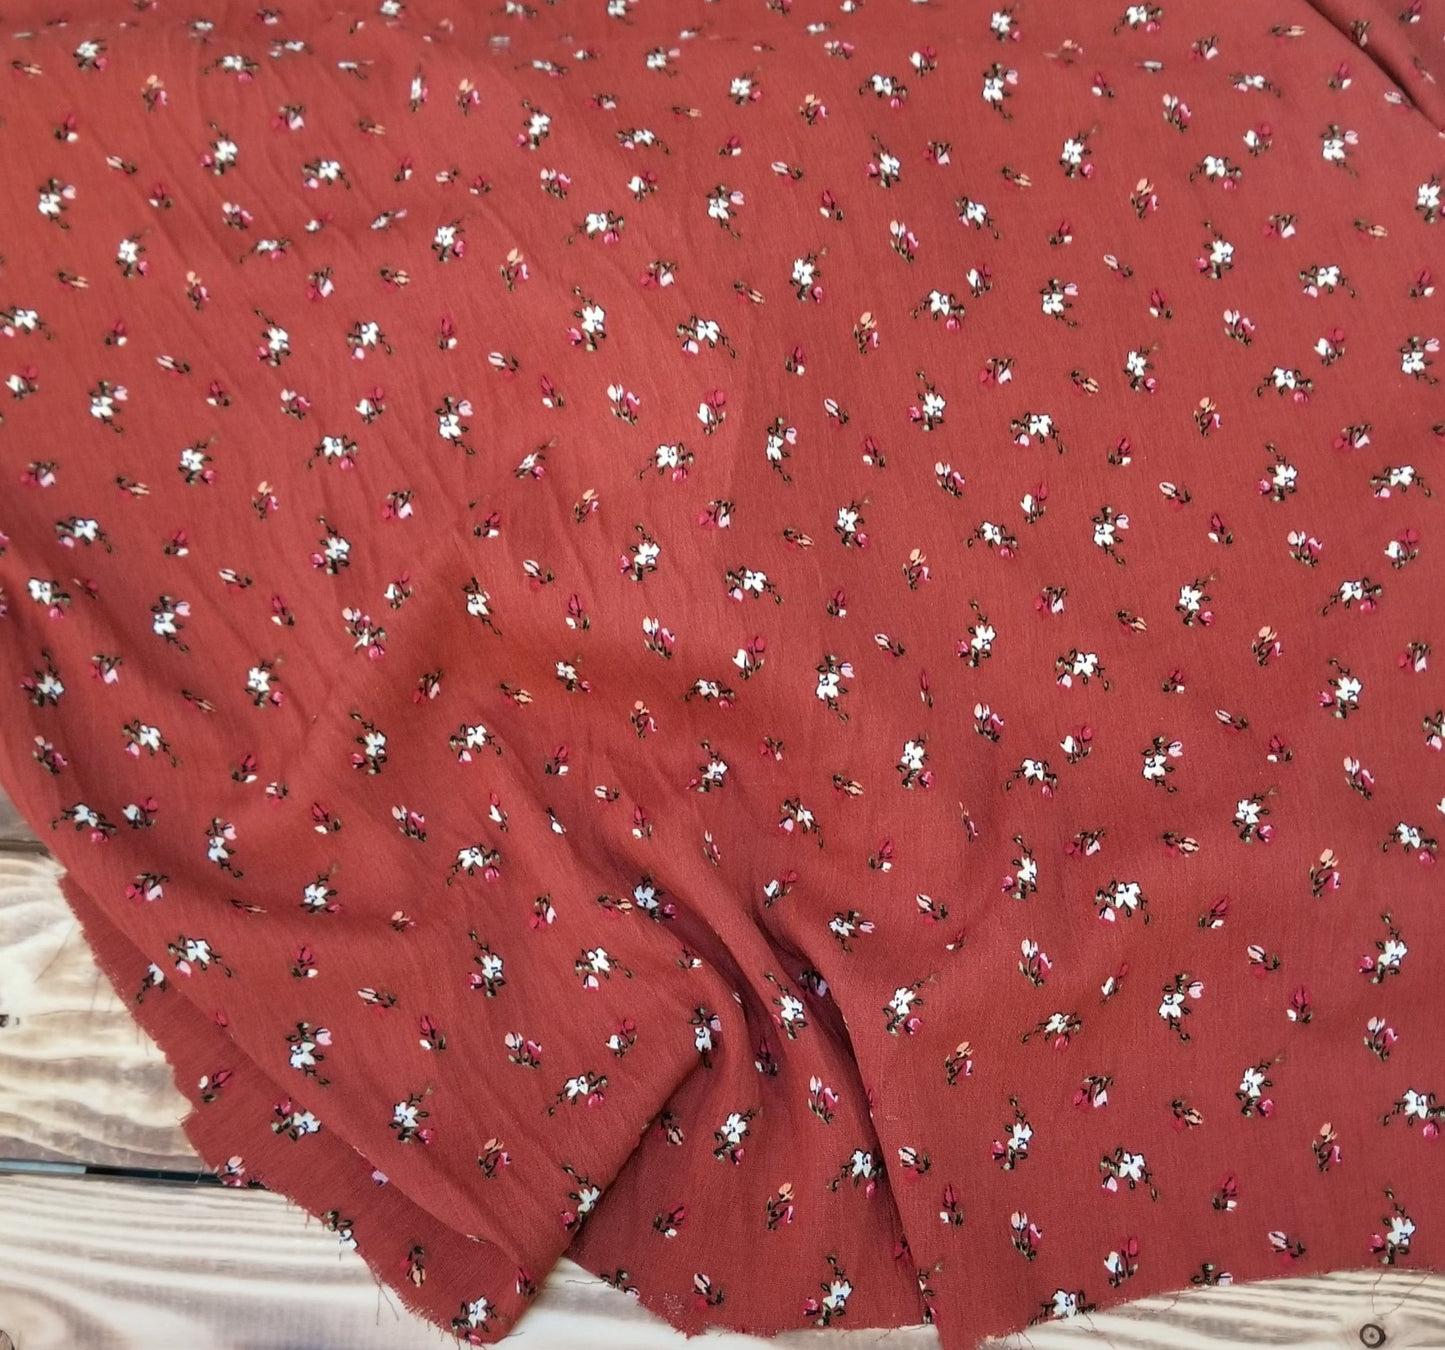 Designer Deadstock Rayon Crinkle Crepe Rust Cottage Core Floral Woven- By the yard